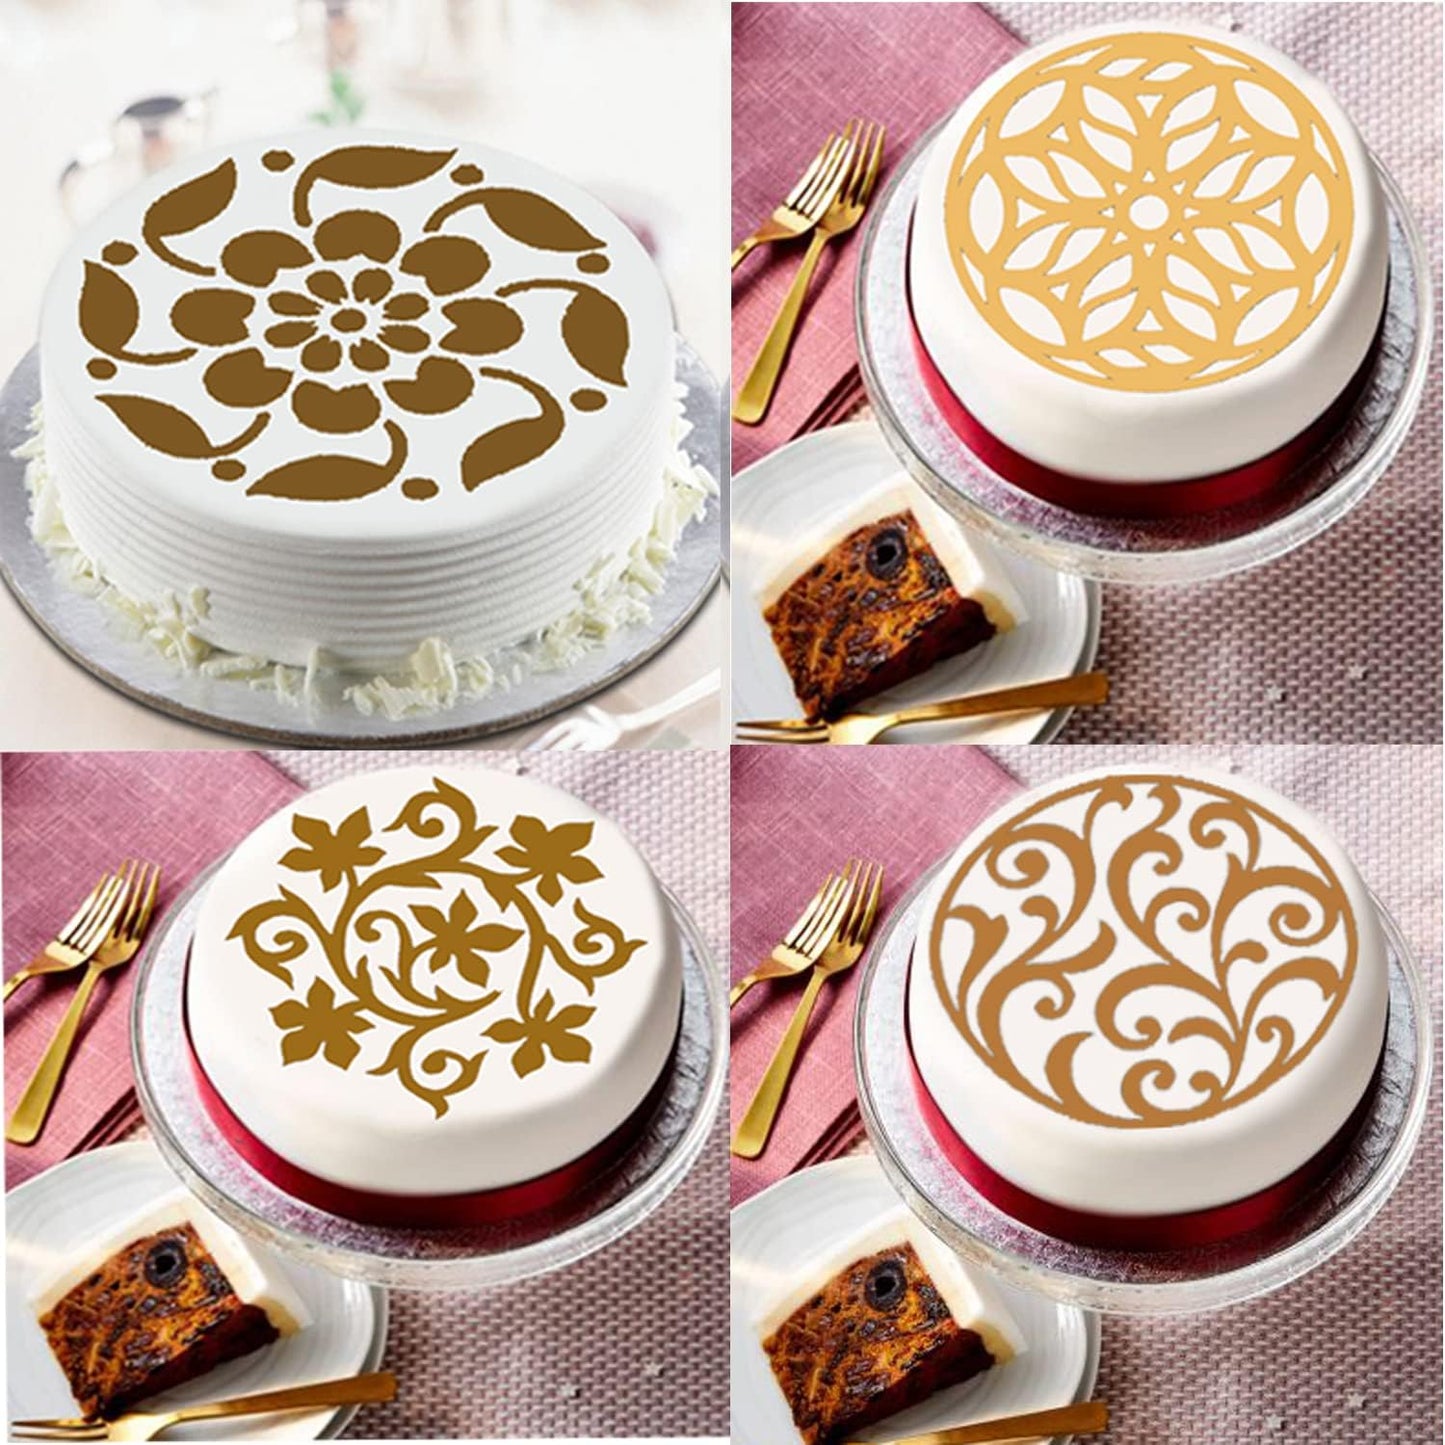 Top Cake Stencils Design 7.9 inches Pack of 4